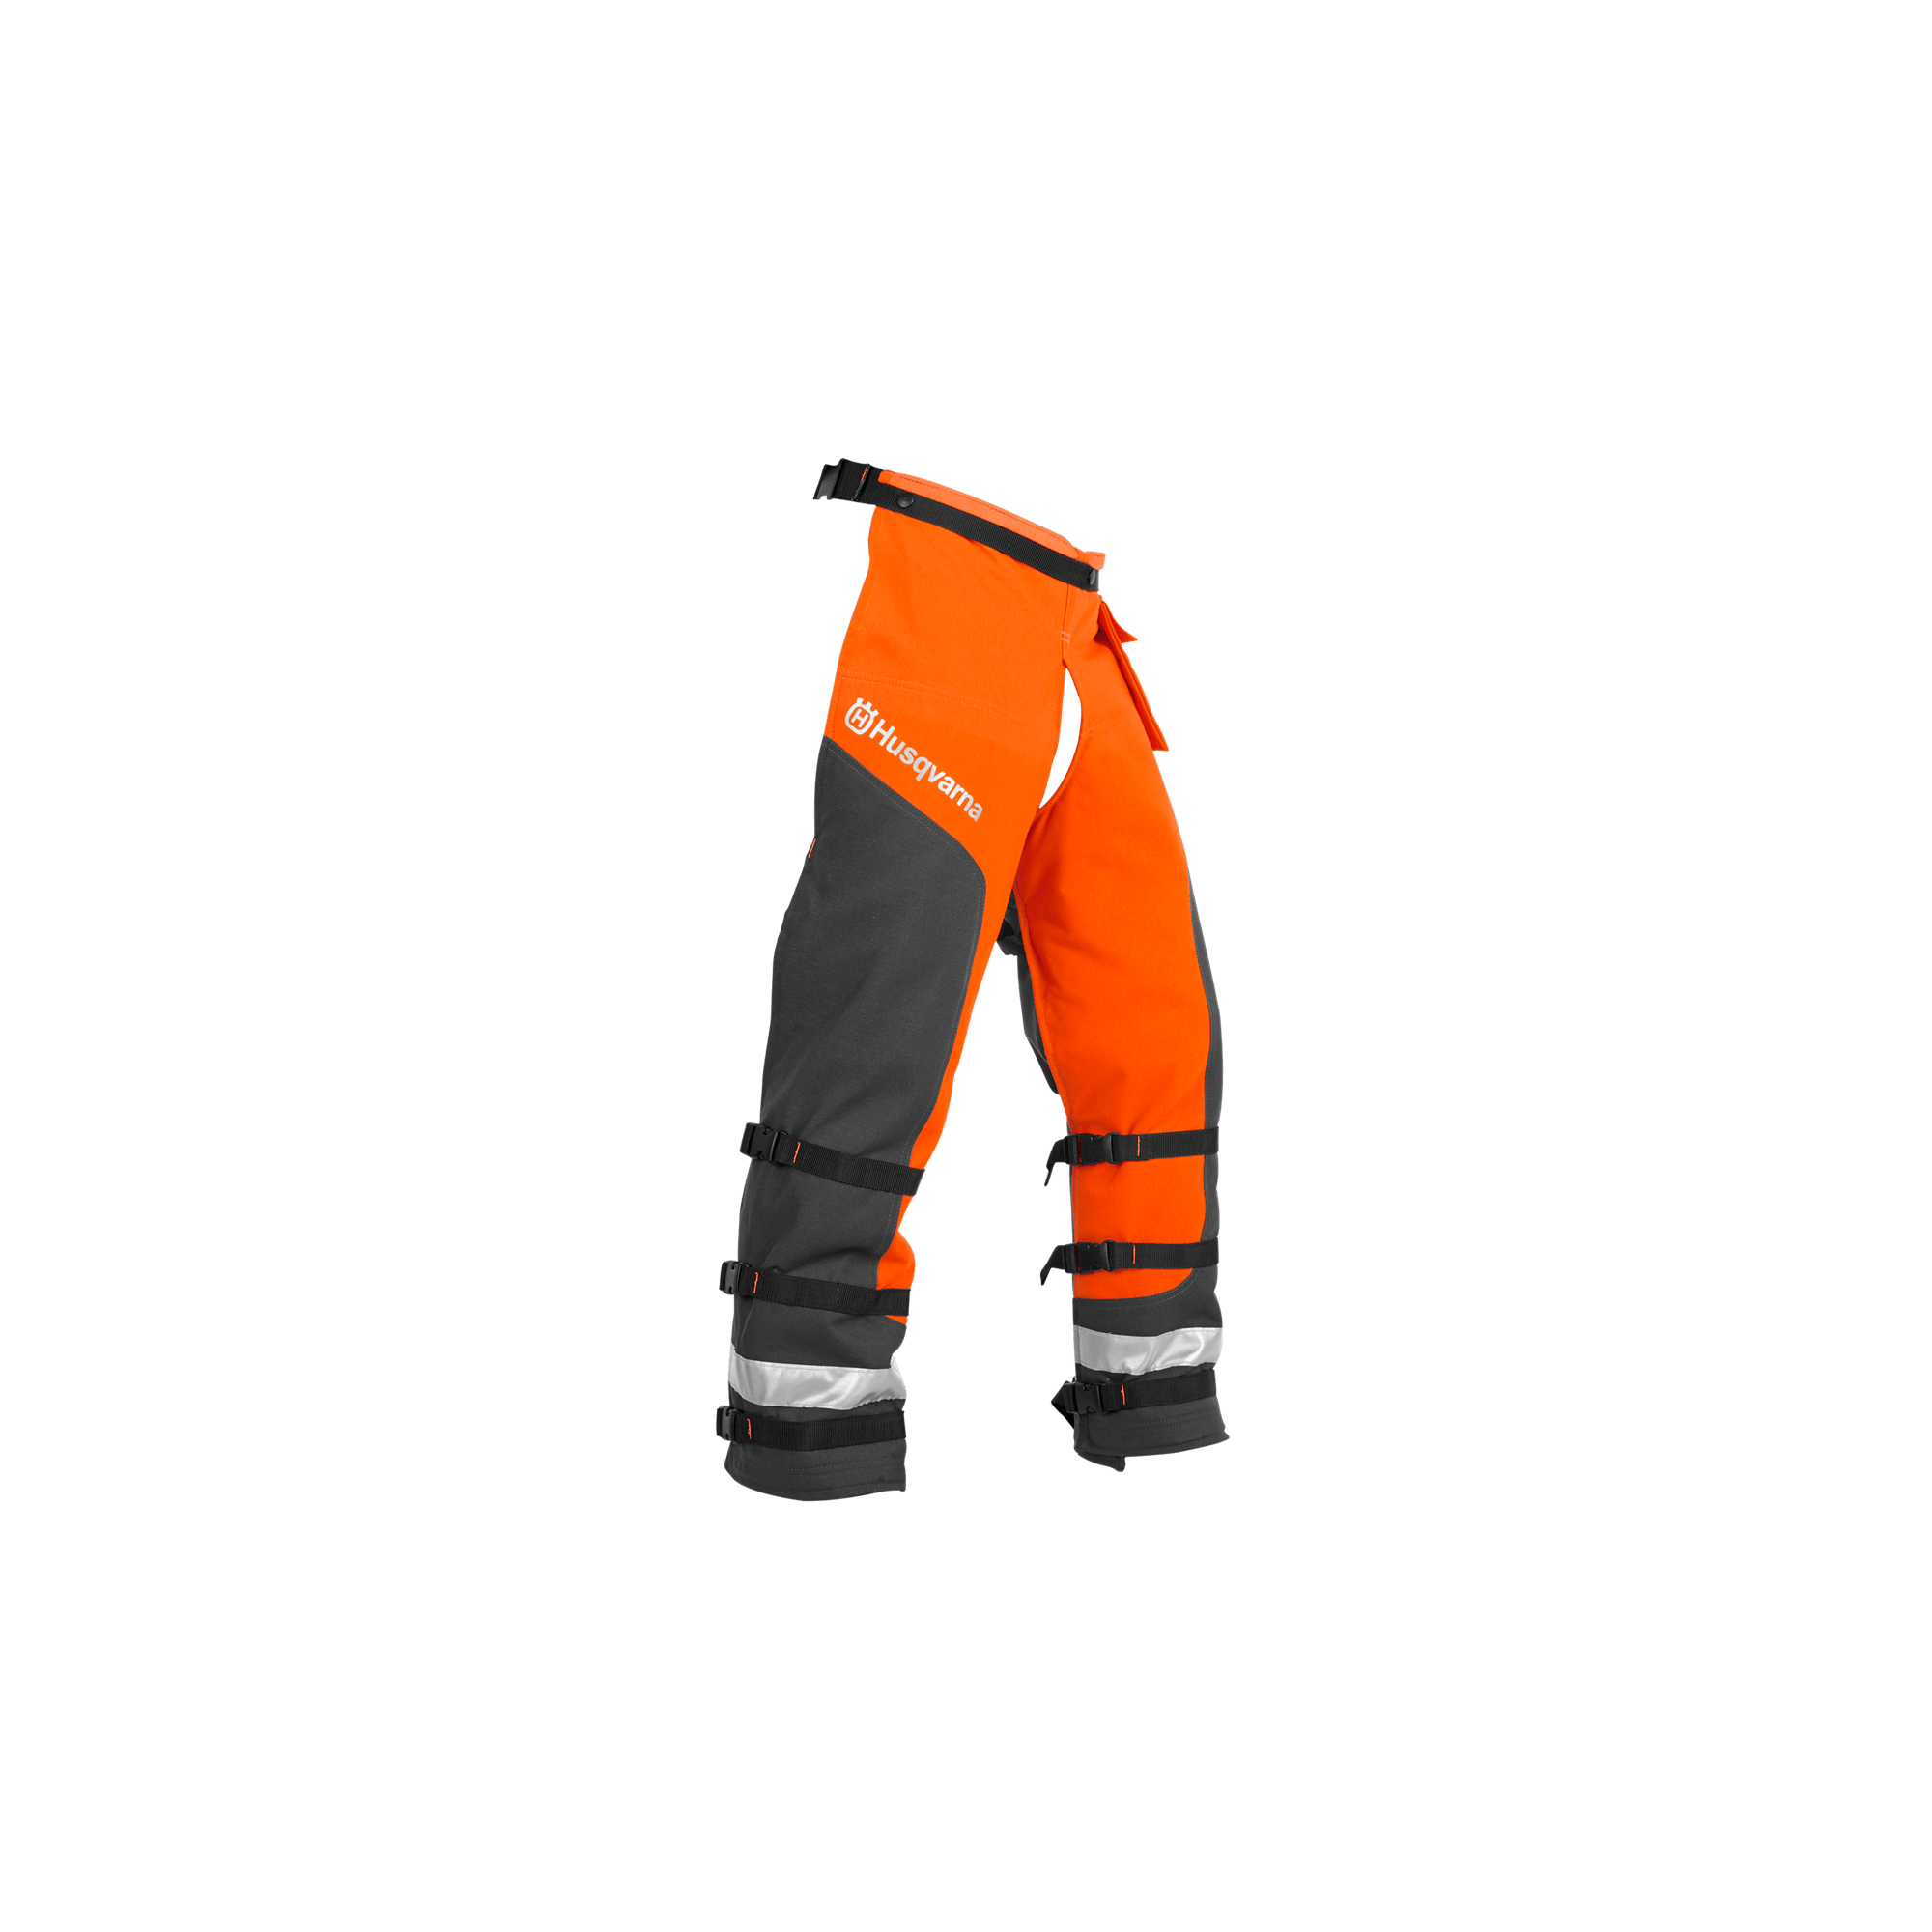 Image for Technical Chainsaw Chaps                                                                                                         from HusqvarnaB2C